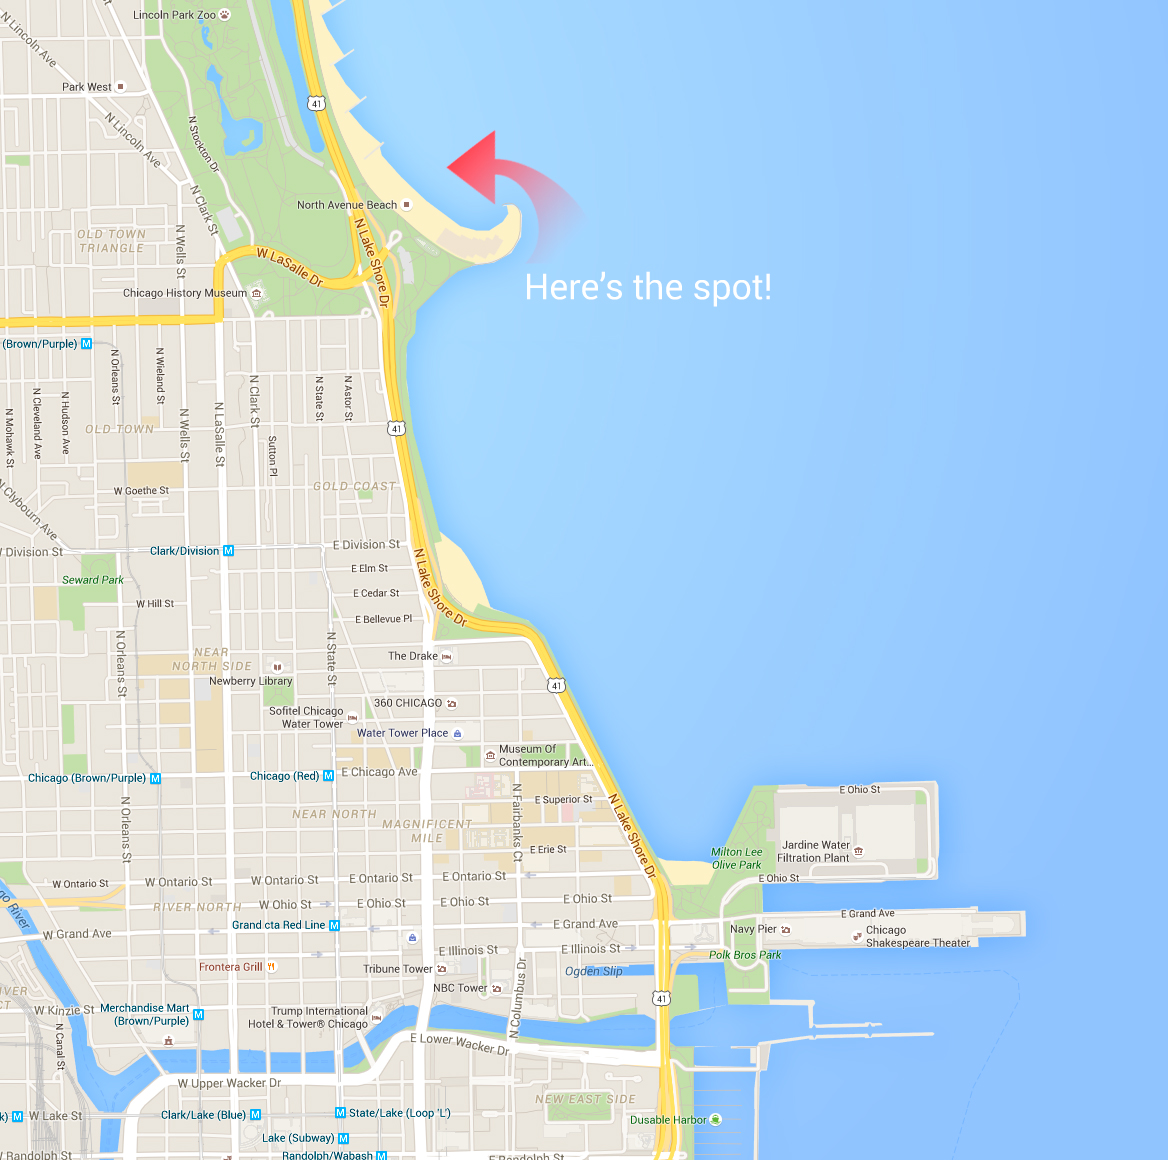 google map showing the location and purpose of the shoot